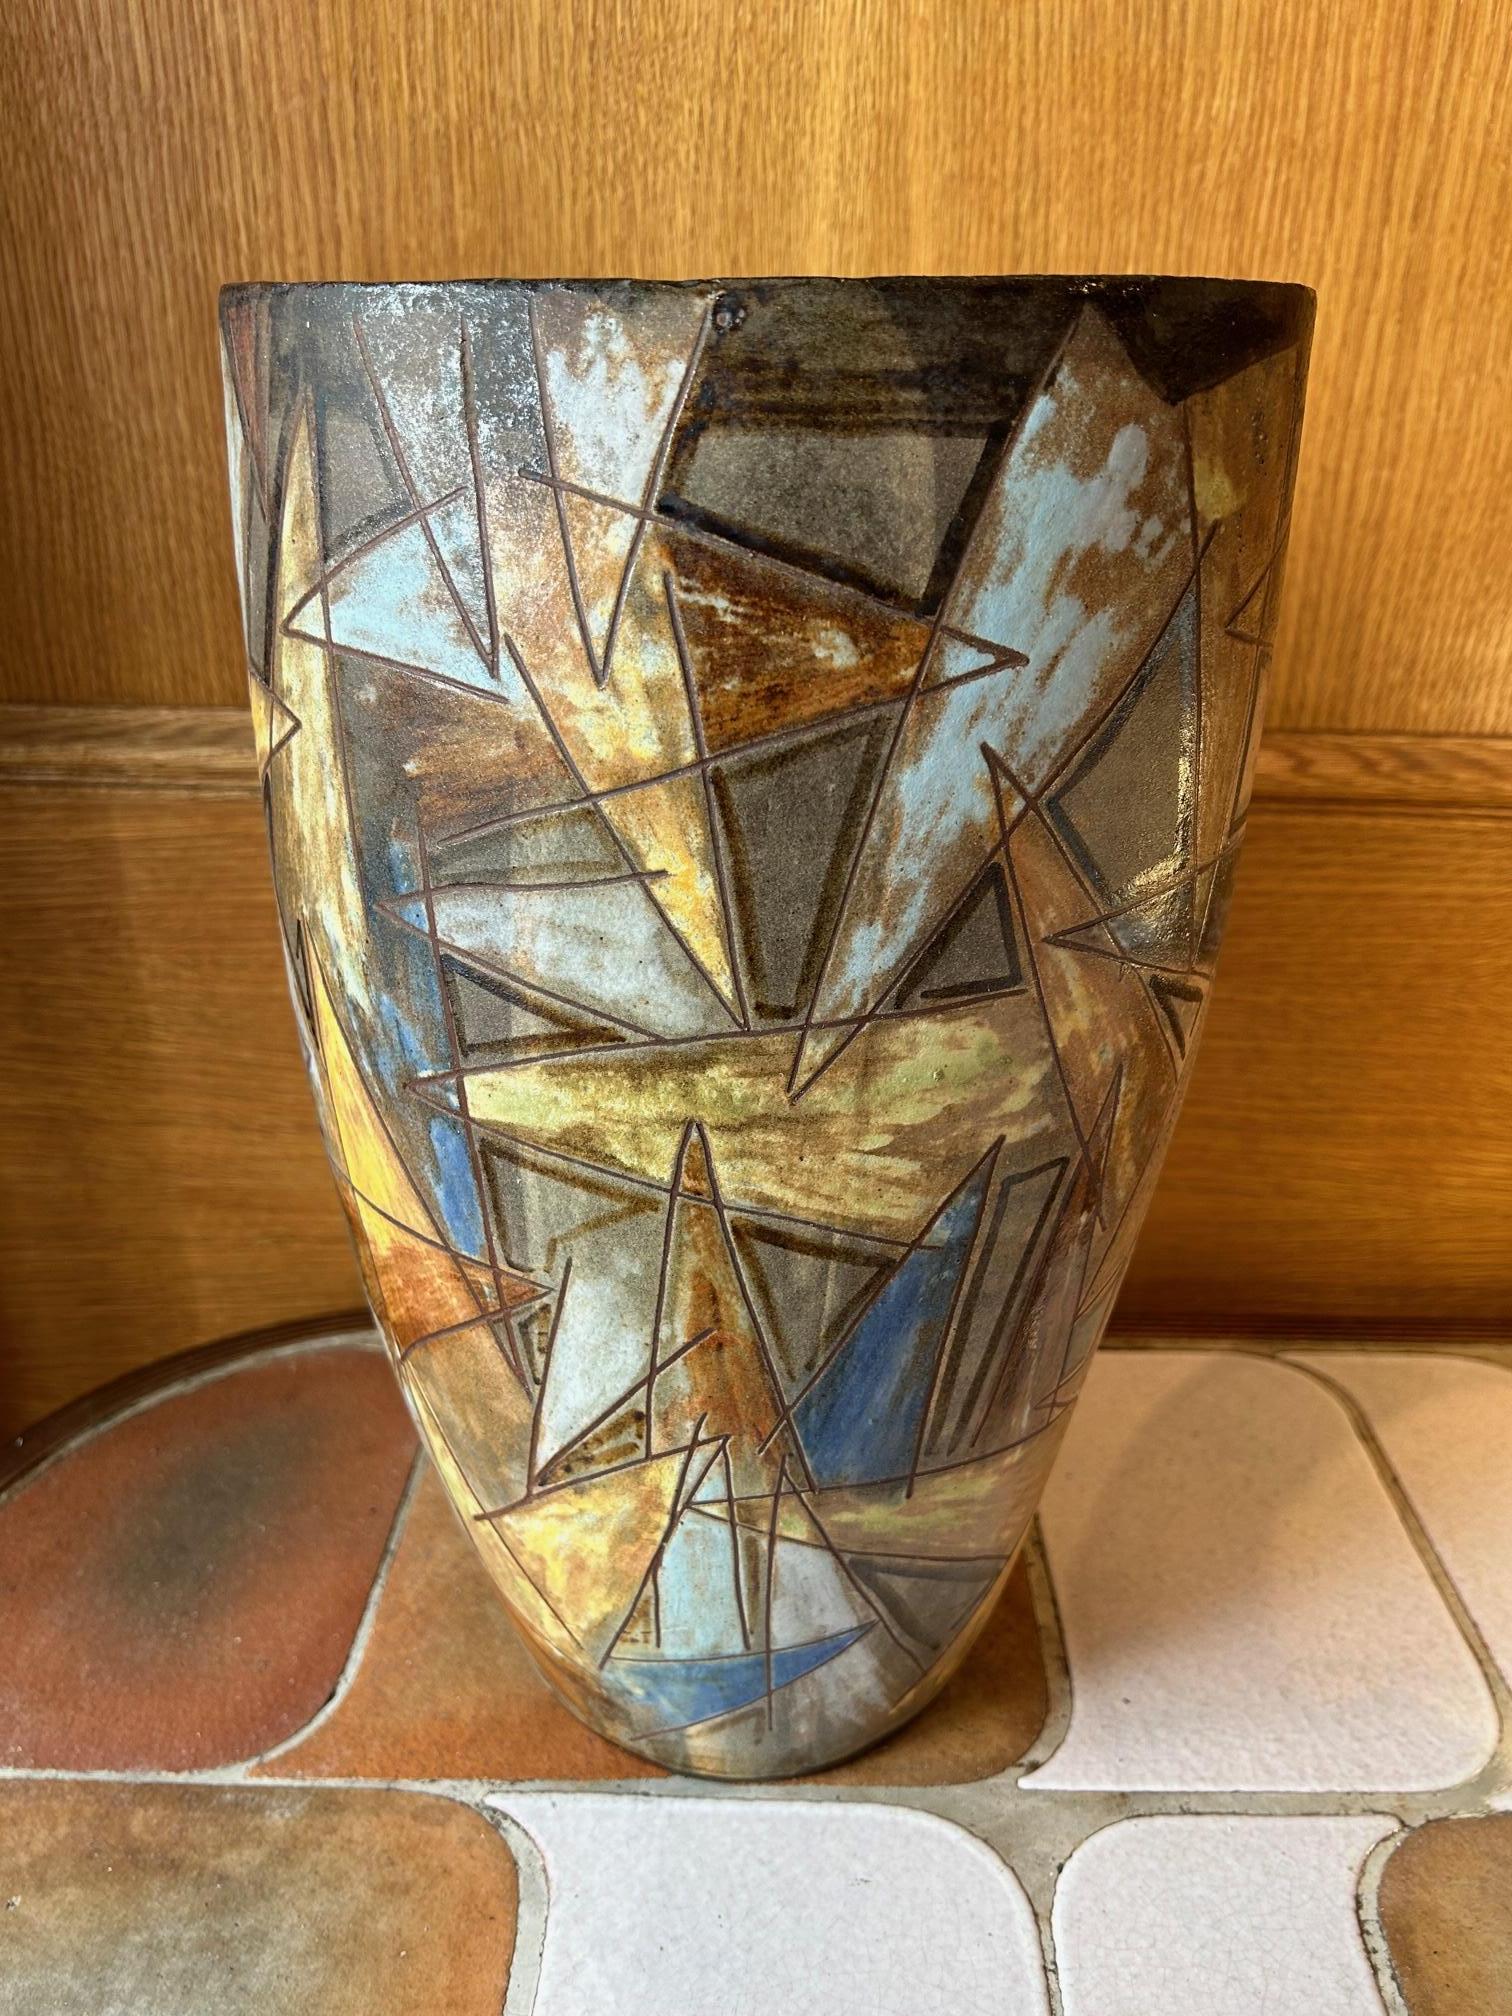 Ceramic Vase by Alexandre Kostanda, Vallauris, France, 1950-60s
Active in Vallauris from 1949 until his death in 2007. Opened his workshop in 1953.